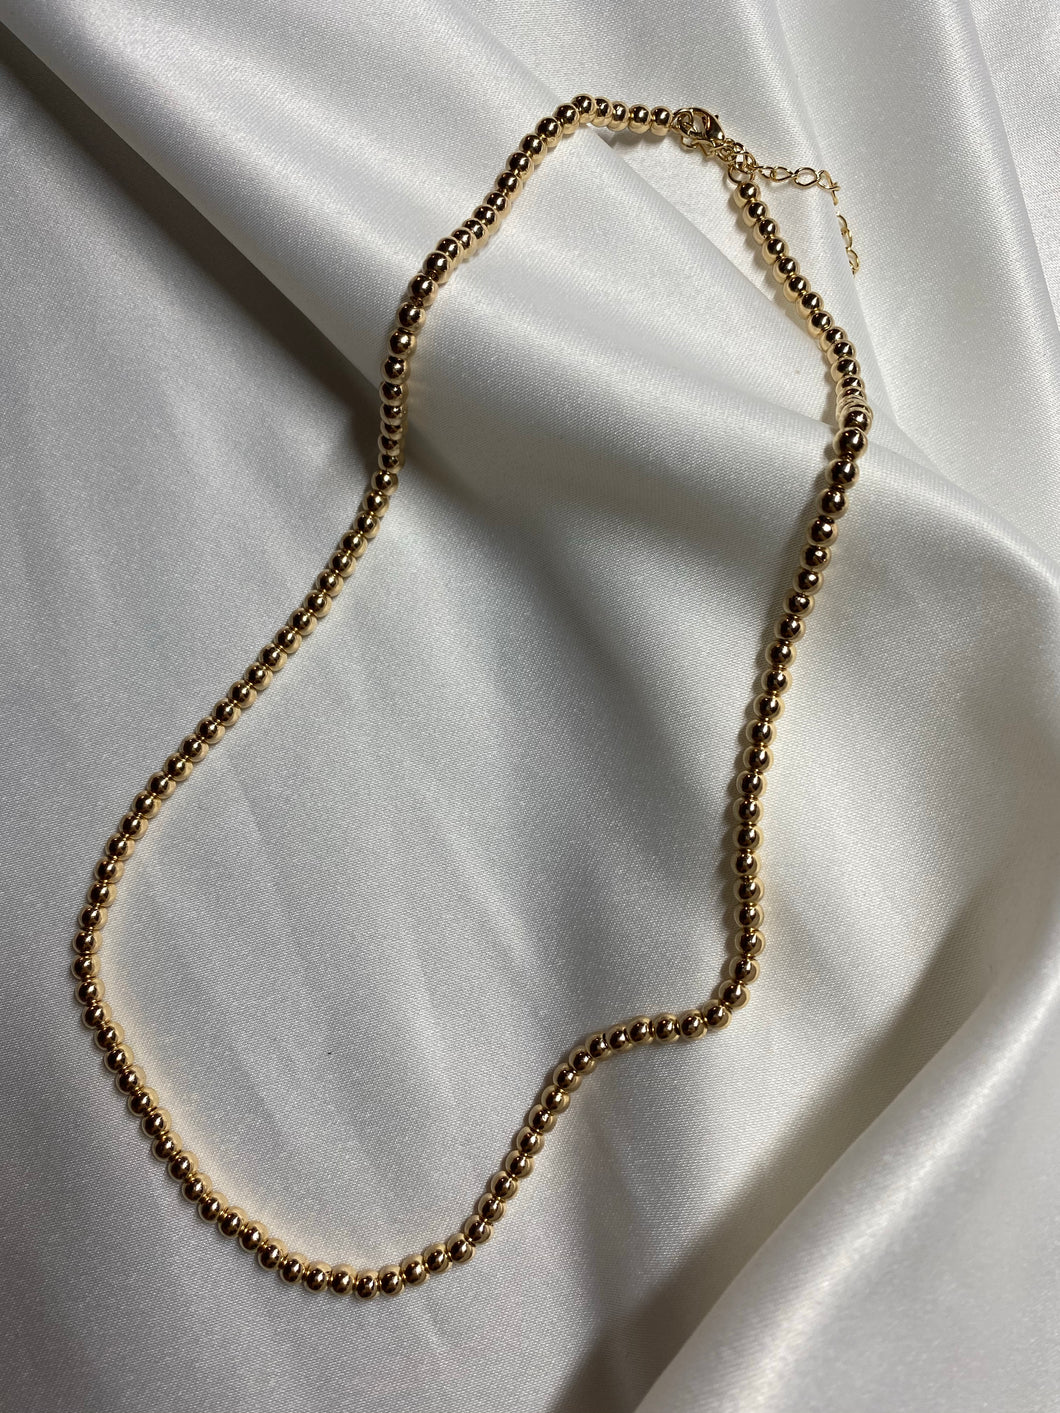 4mm Beaded Necklace